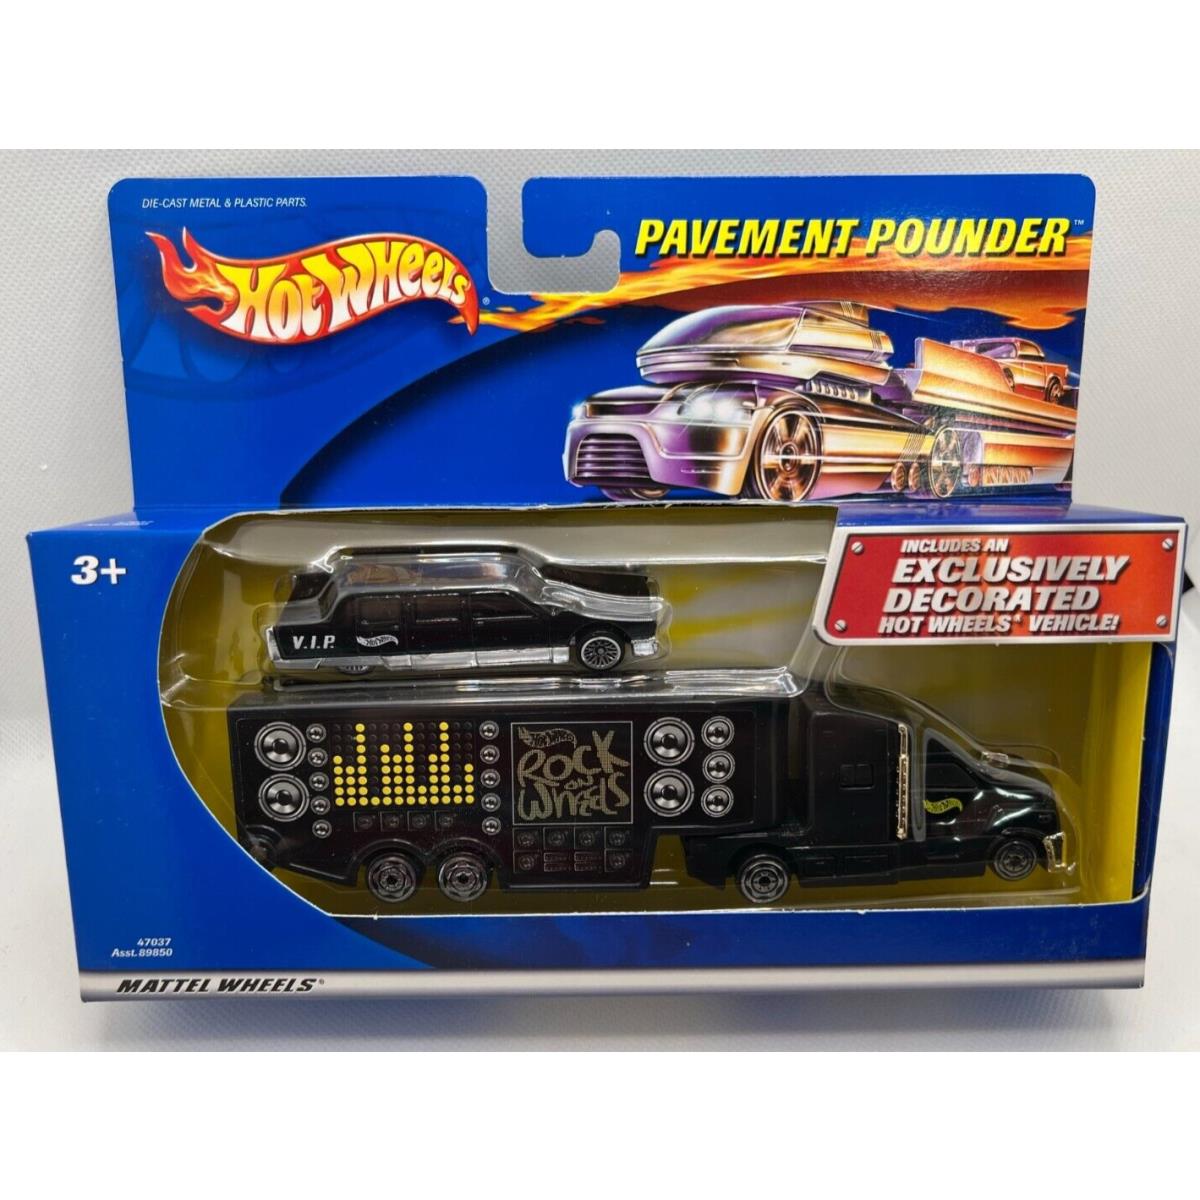 Hot Wheels Pavement Pounders Cadillac Limo Black